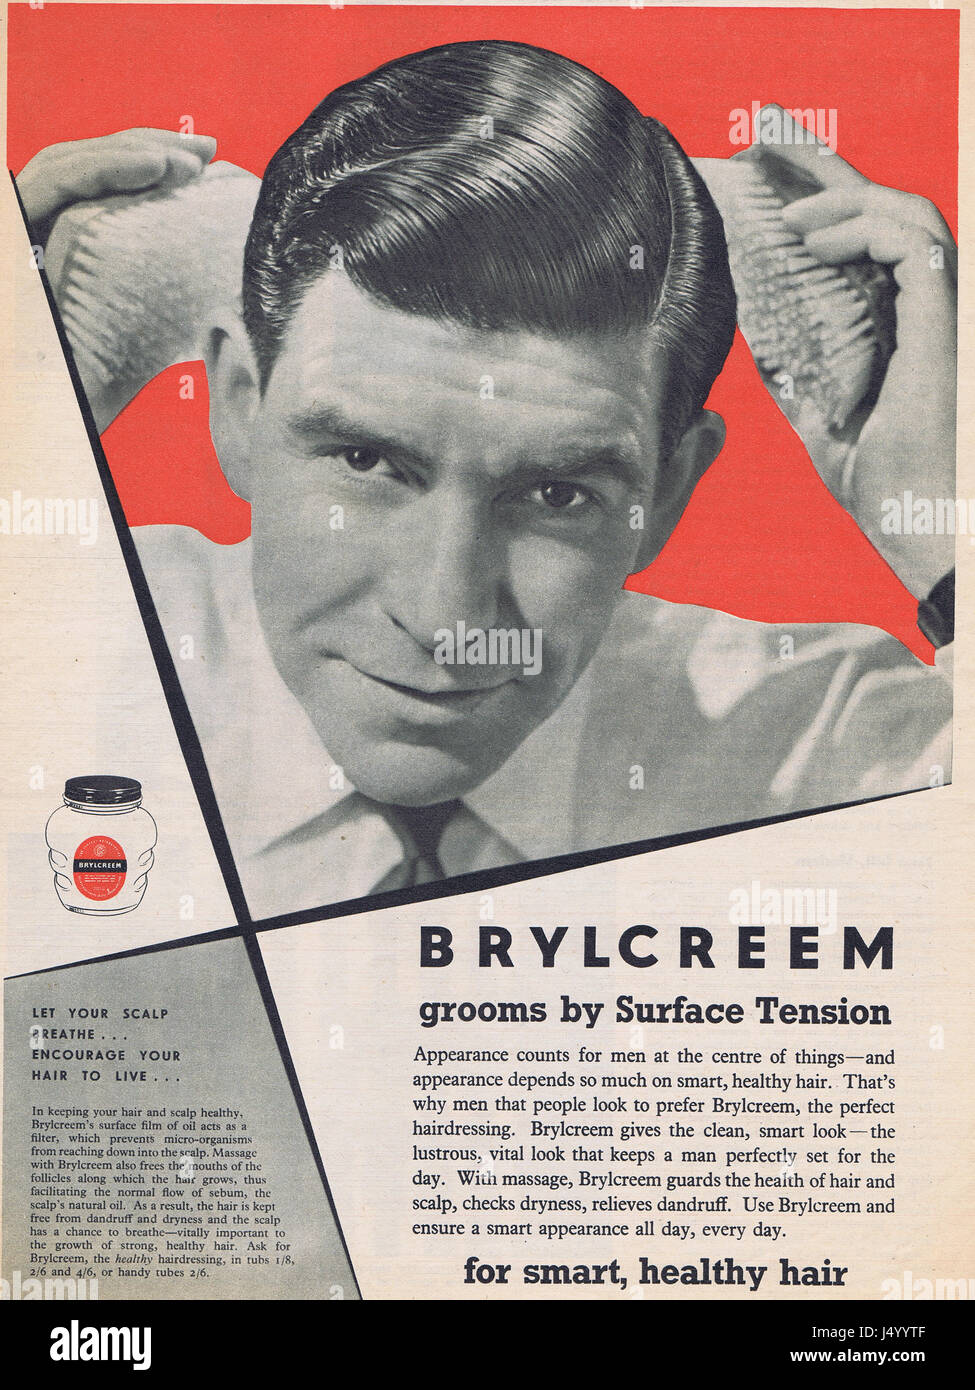 How to Use Brylcreem: 13 Steps (with Pictures) - wikiHow